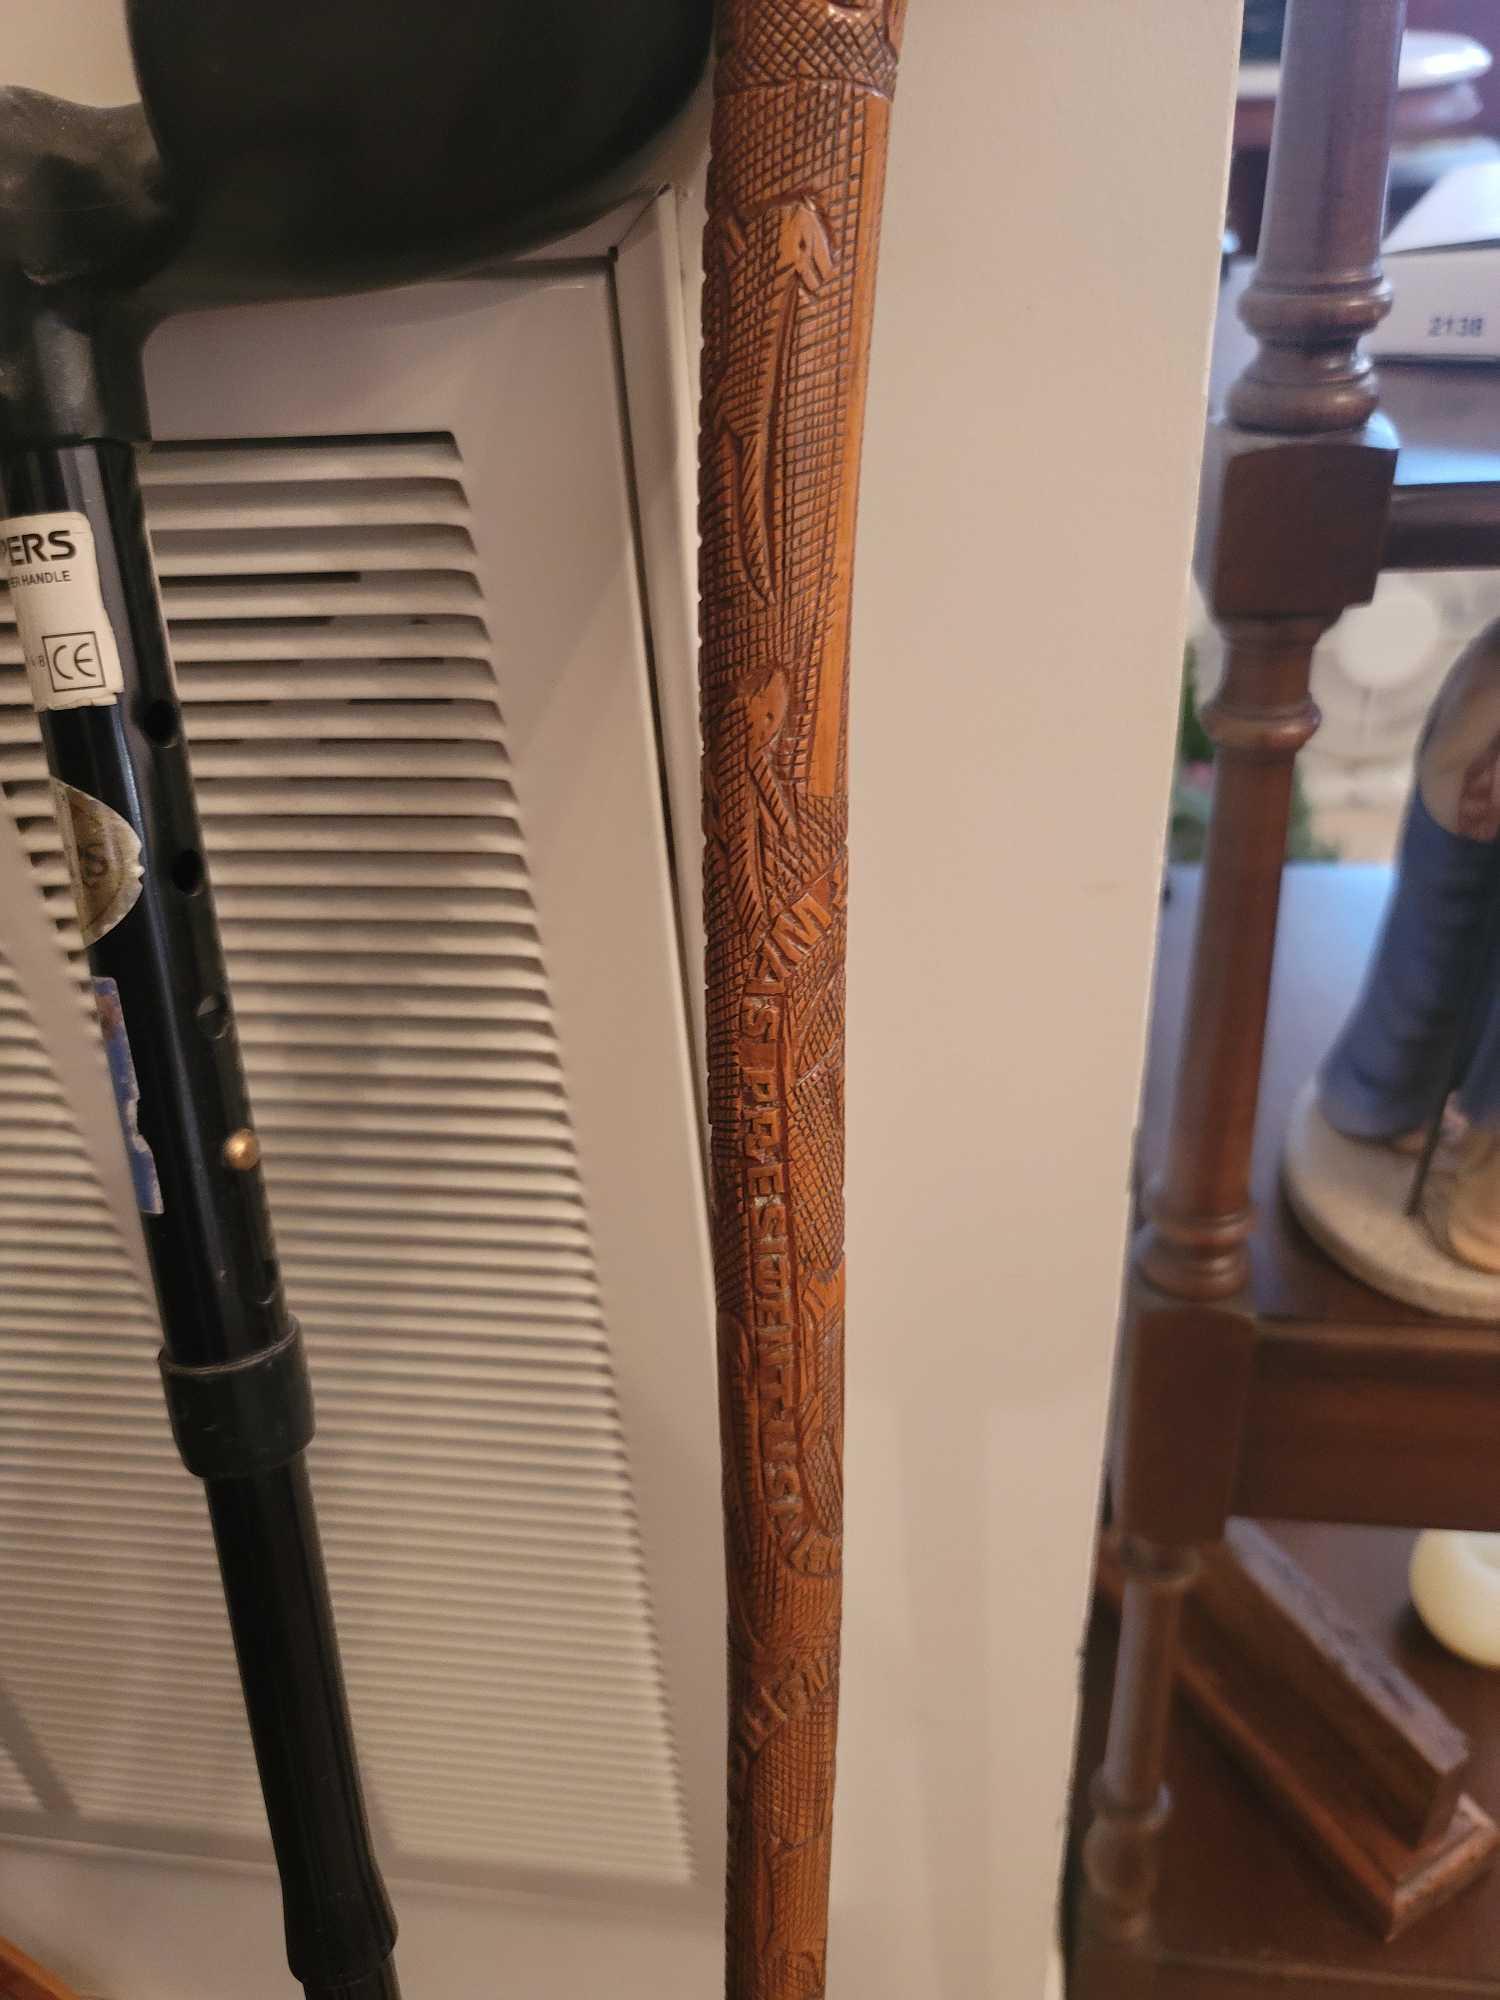 (DR) LOT OF 3 ASSORTED CANES. INCLUDES 2 A CARVED WOODEN CANE WITH NAMES OF U.S. PRESIDENTS, A BLACK